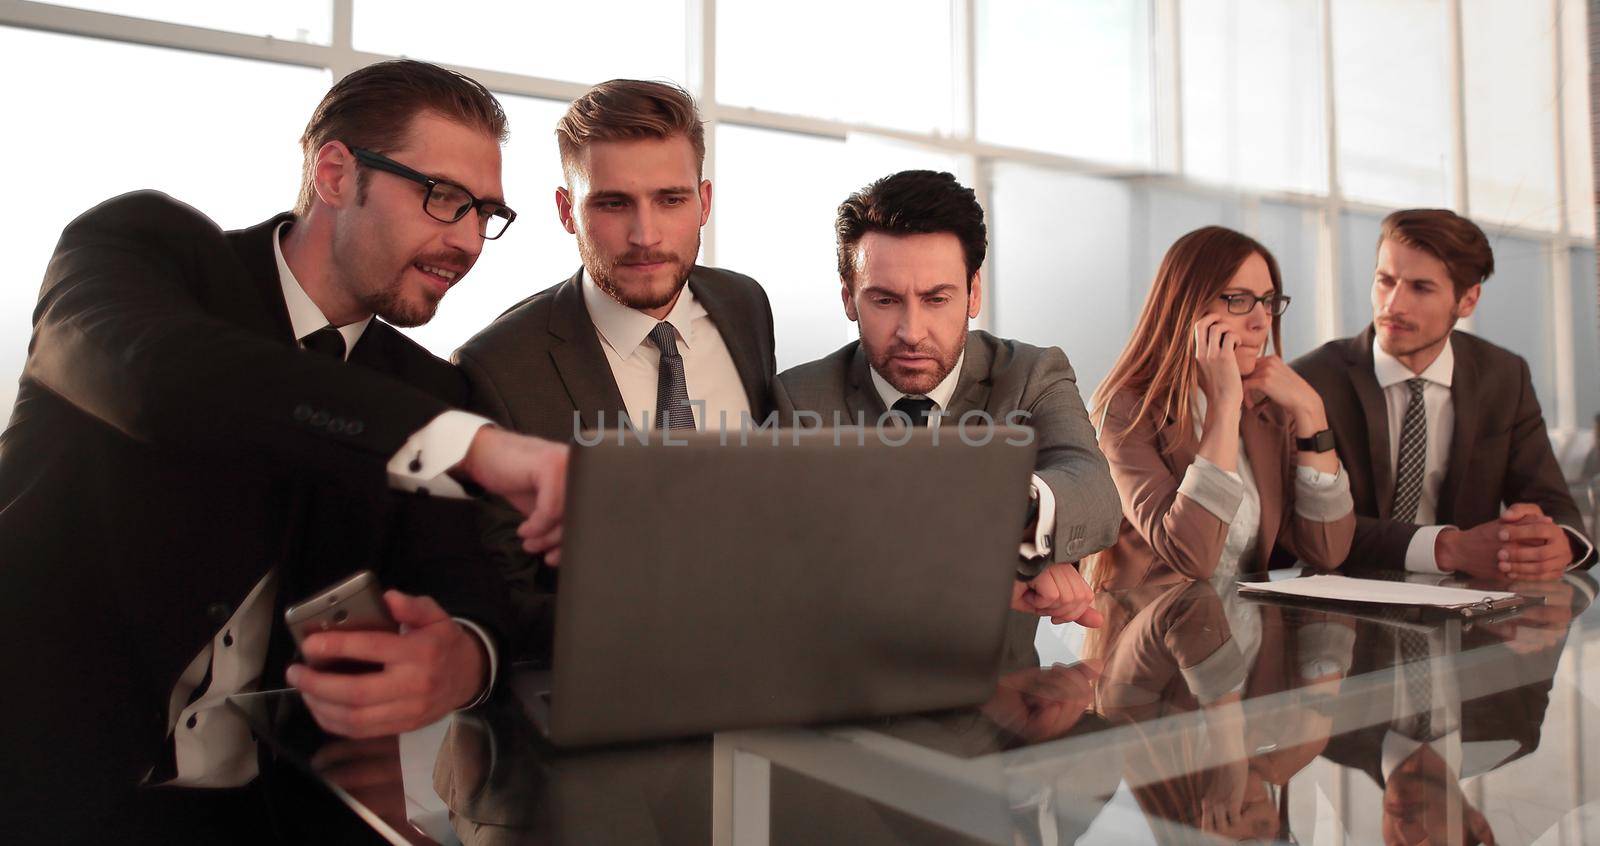 Businessmen and businessmen using laptop together, sitting in front of windows of office building